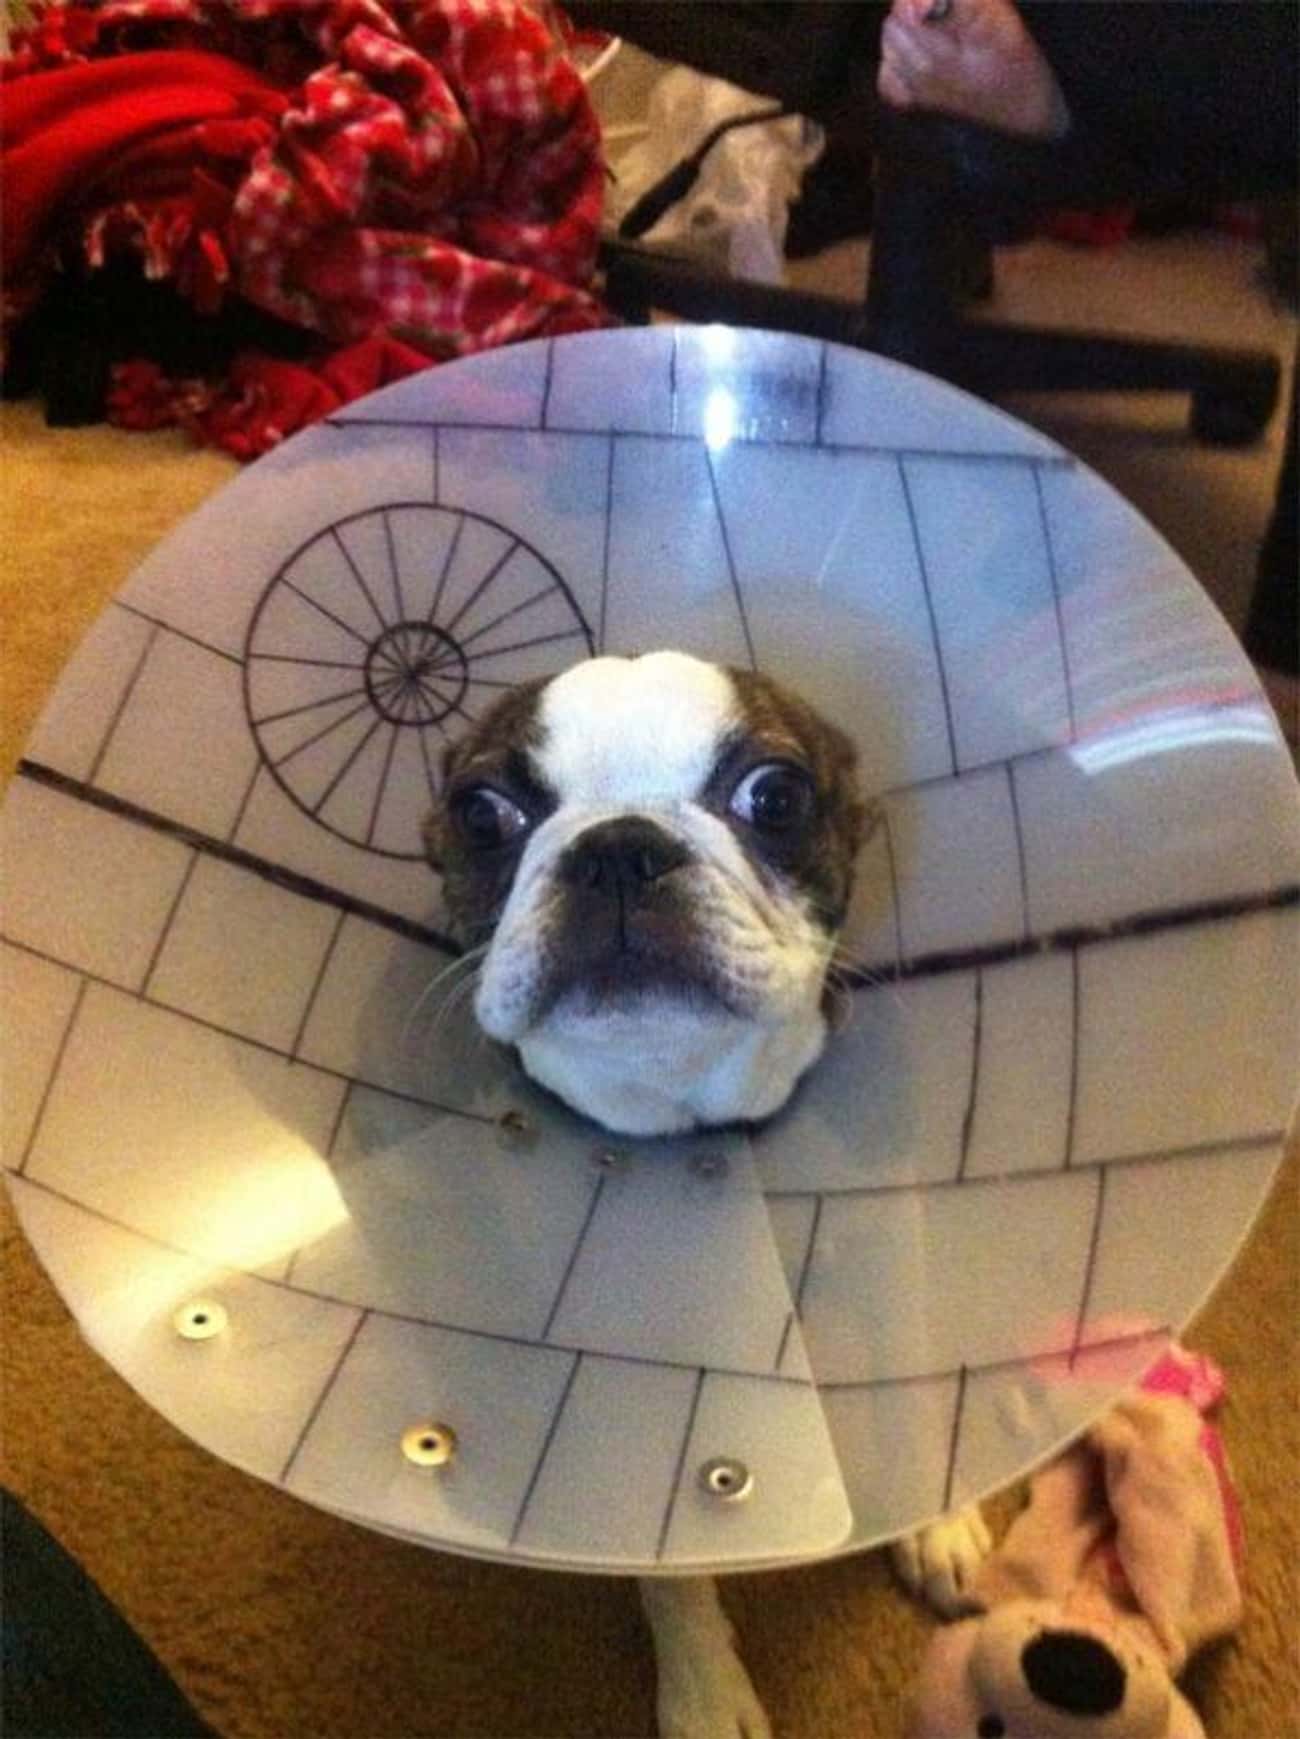 That's No Moon... That's A Cone